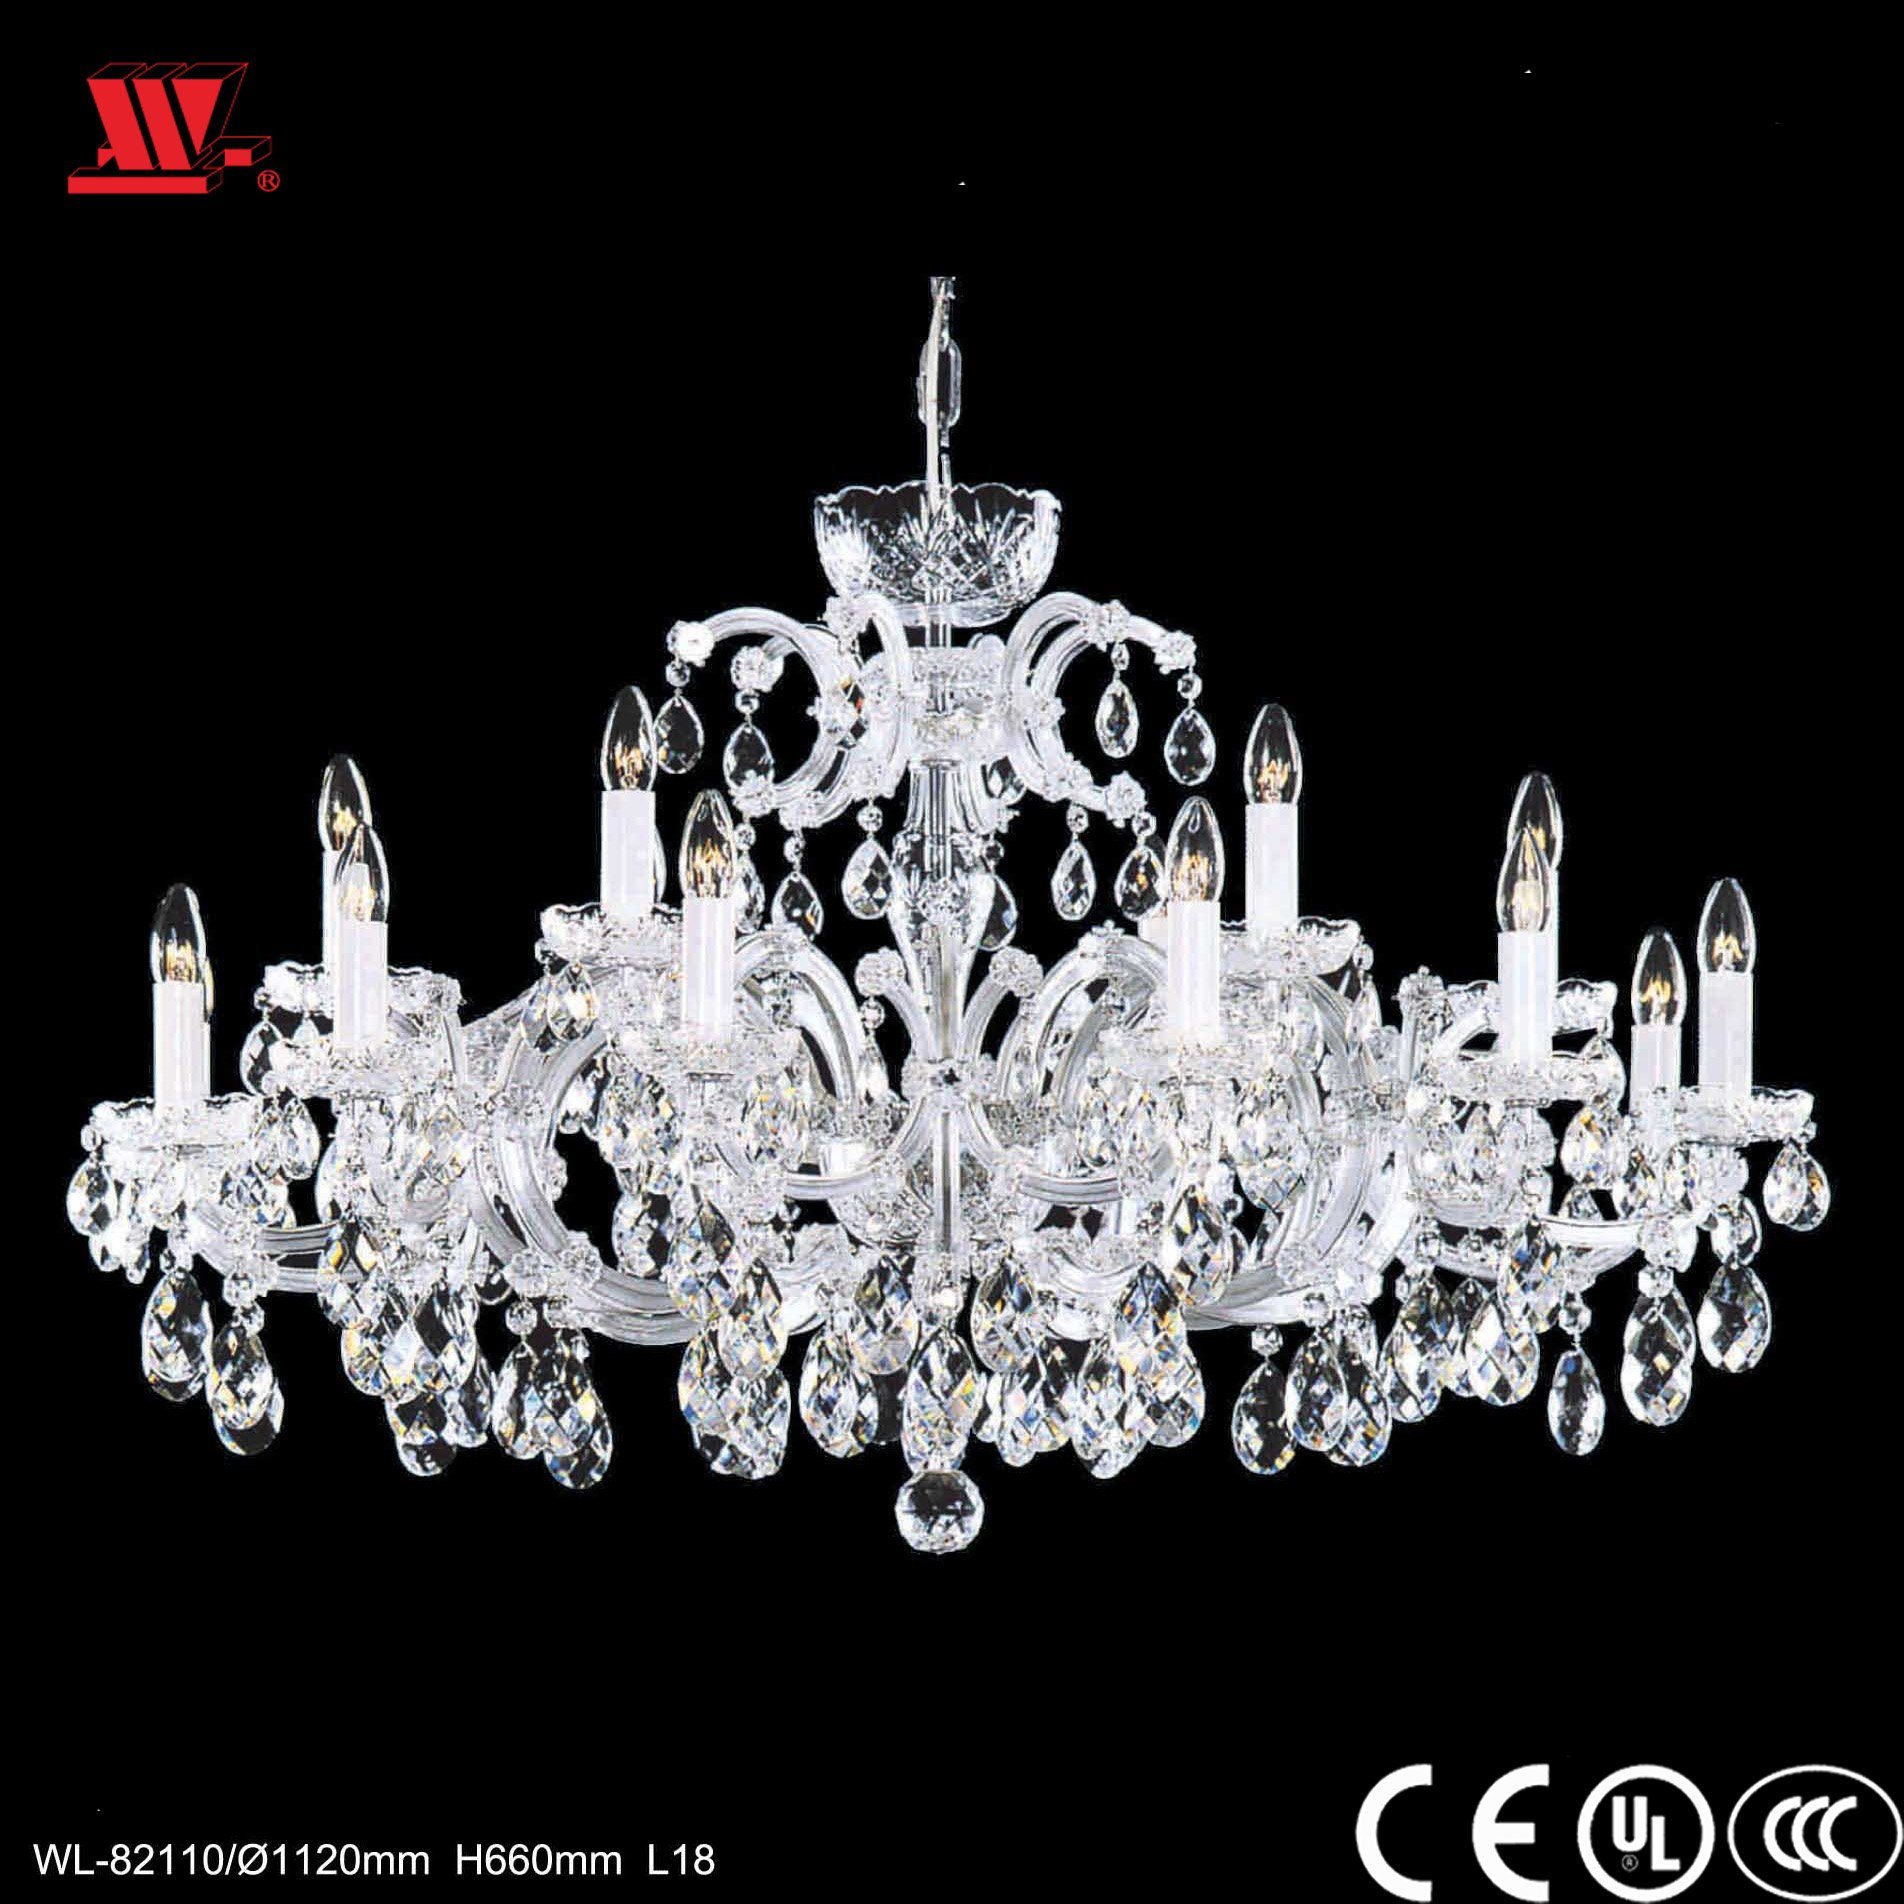 Crystal Chandelier with Glass Chains Wl-82110